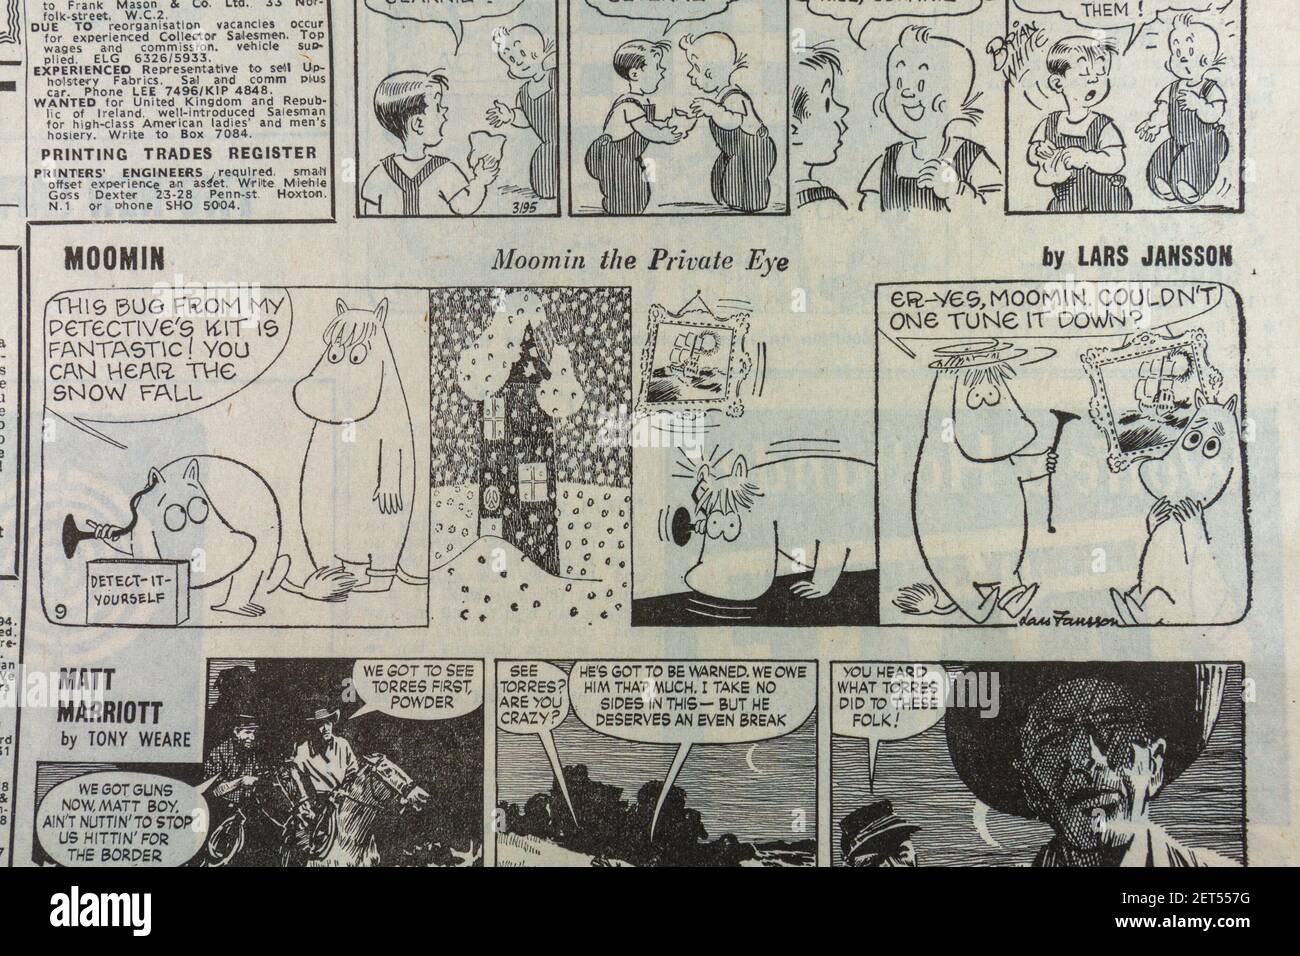 The Moomin comic strip by Lars Jansson in the Evening News newspaper (Friday 24th December 1965), London, UK. Stock Photo